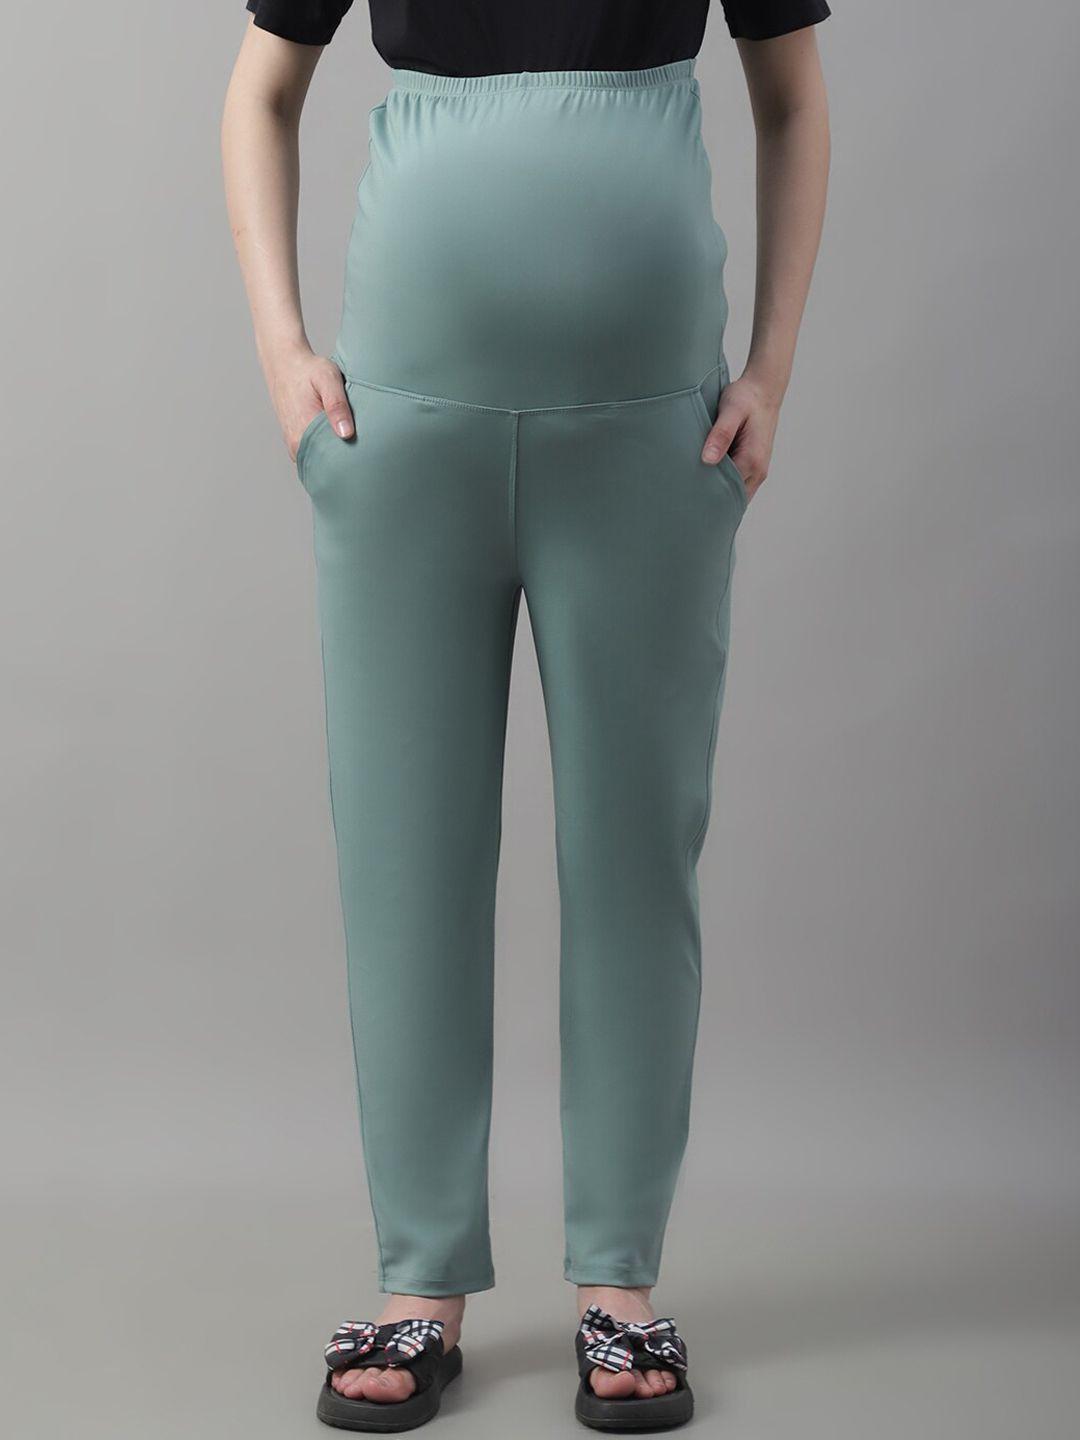 frempy high-rise maternity trousers